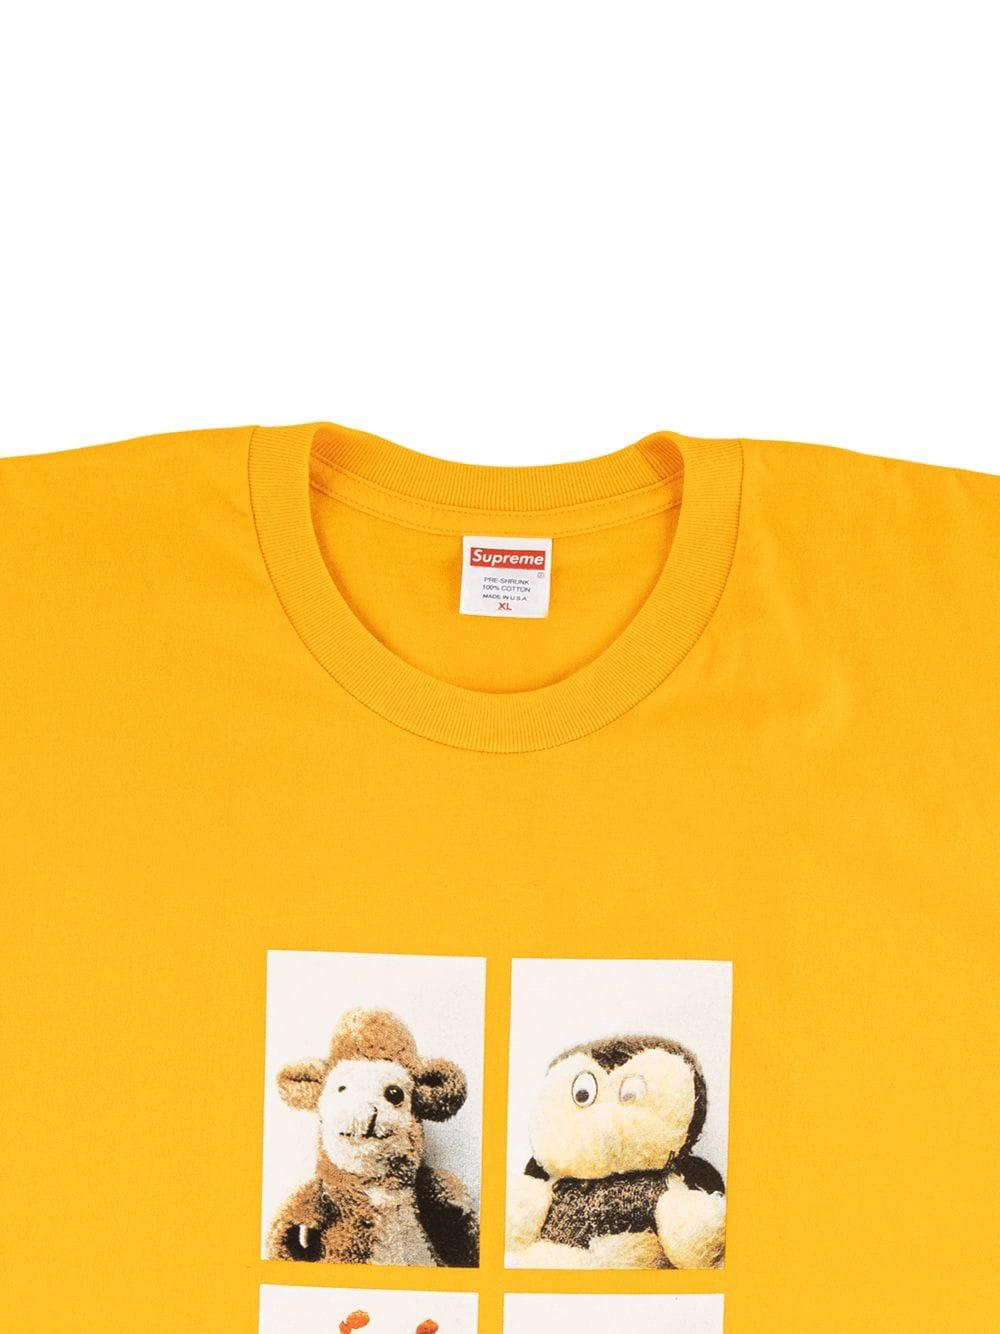 Supreme Mike Kelley Ahh Youth T-shirt in Orange for Men - Lyst